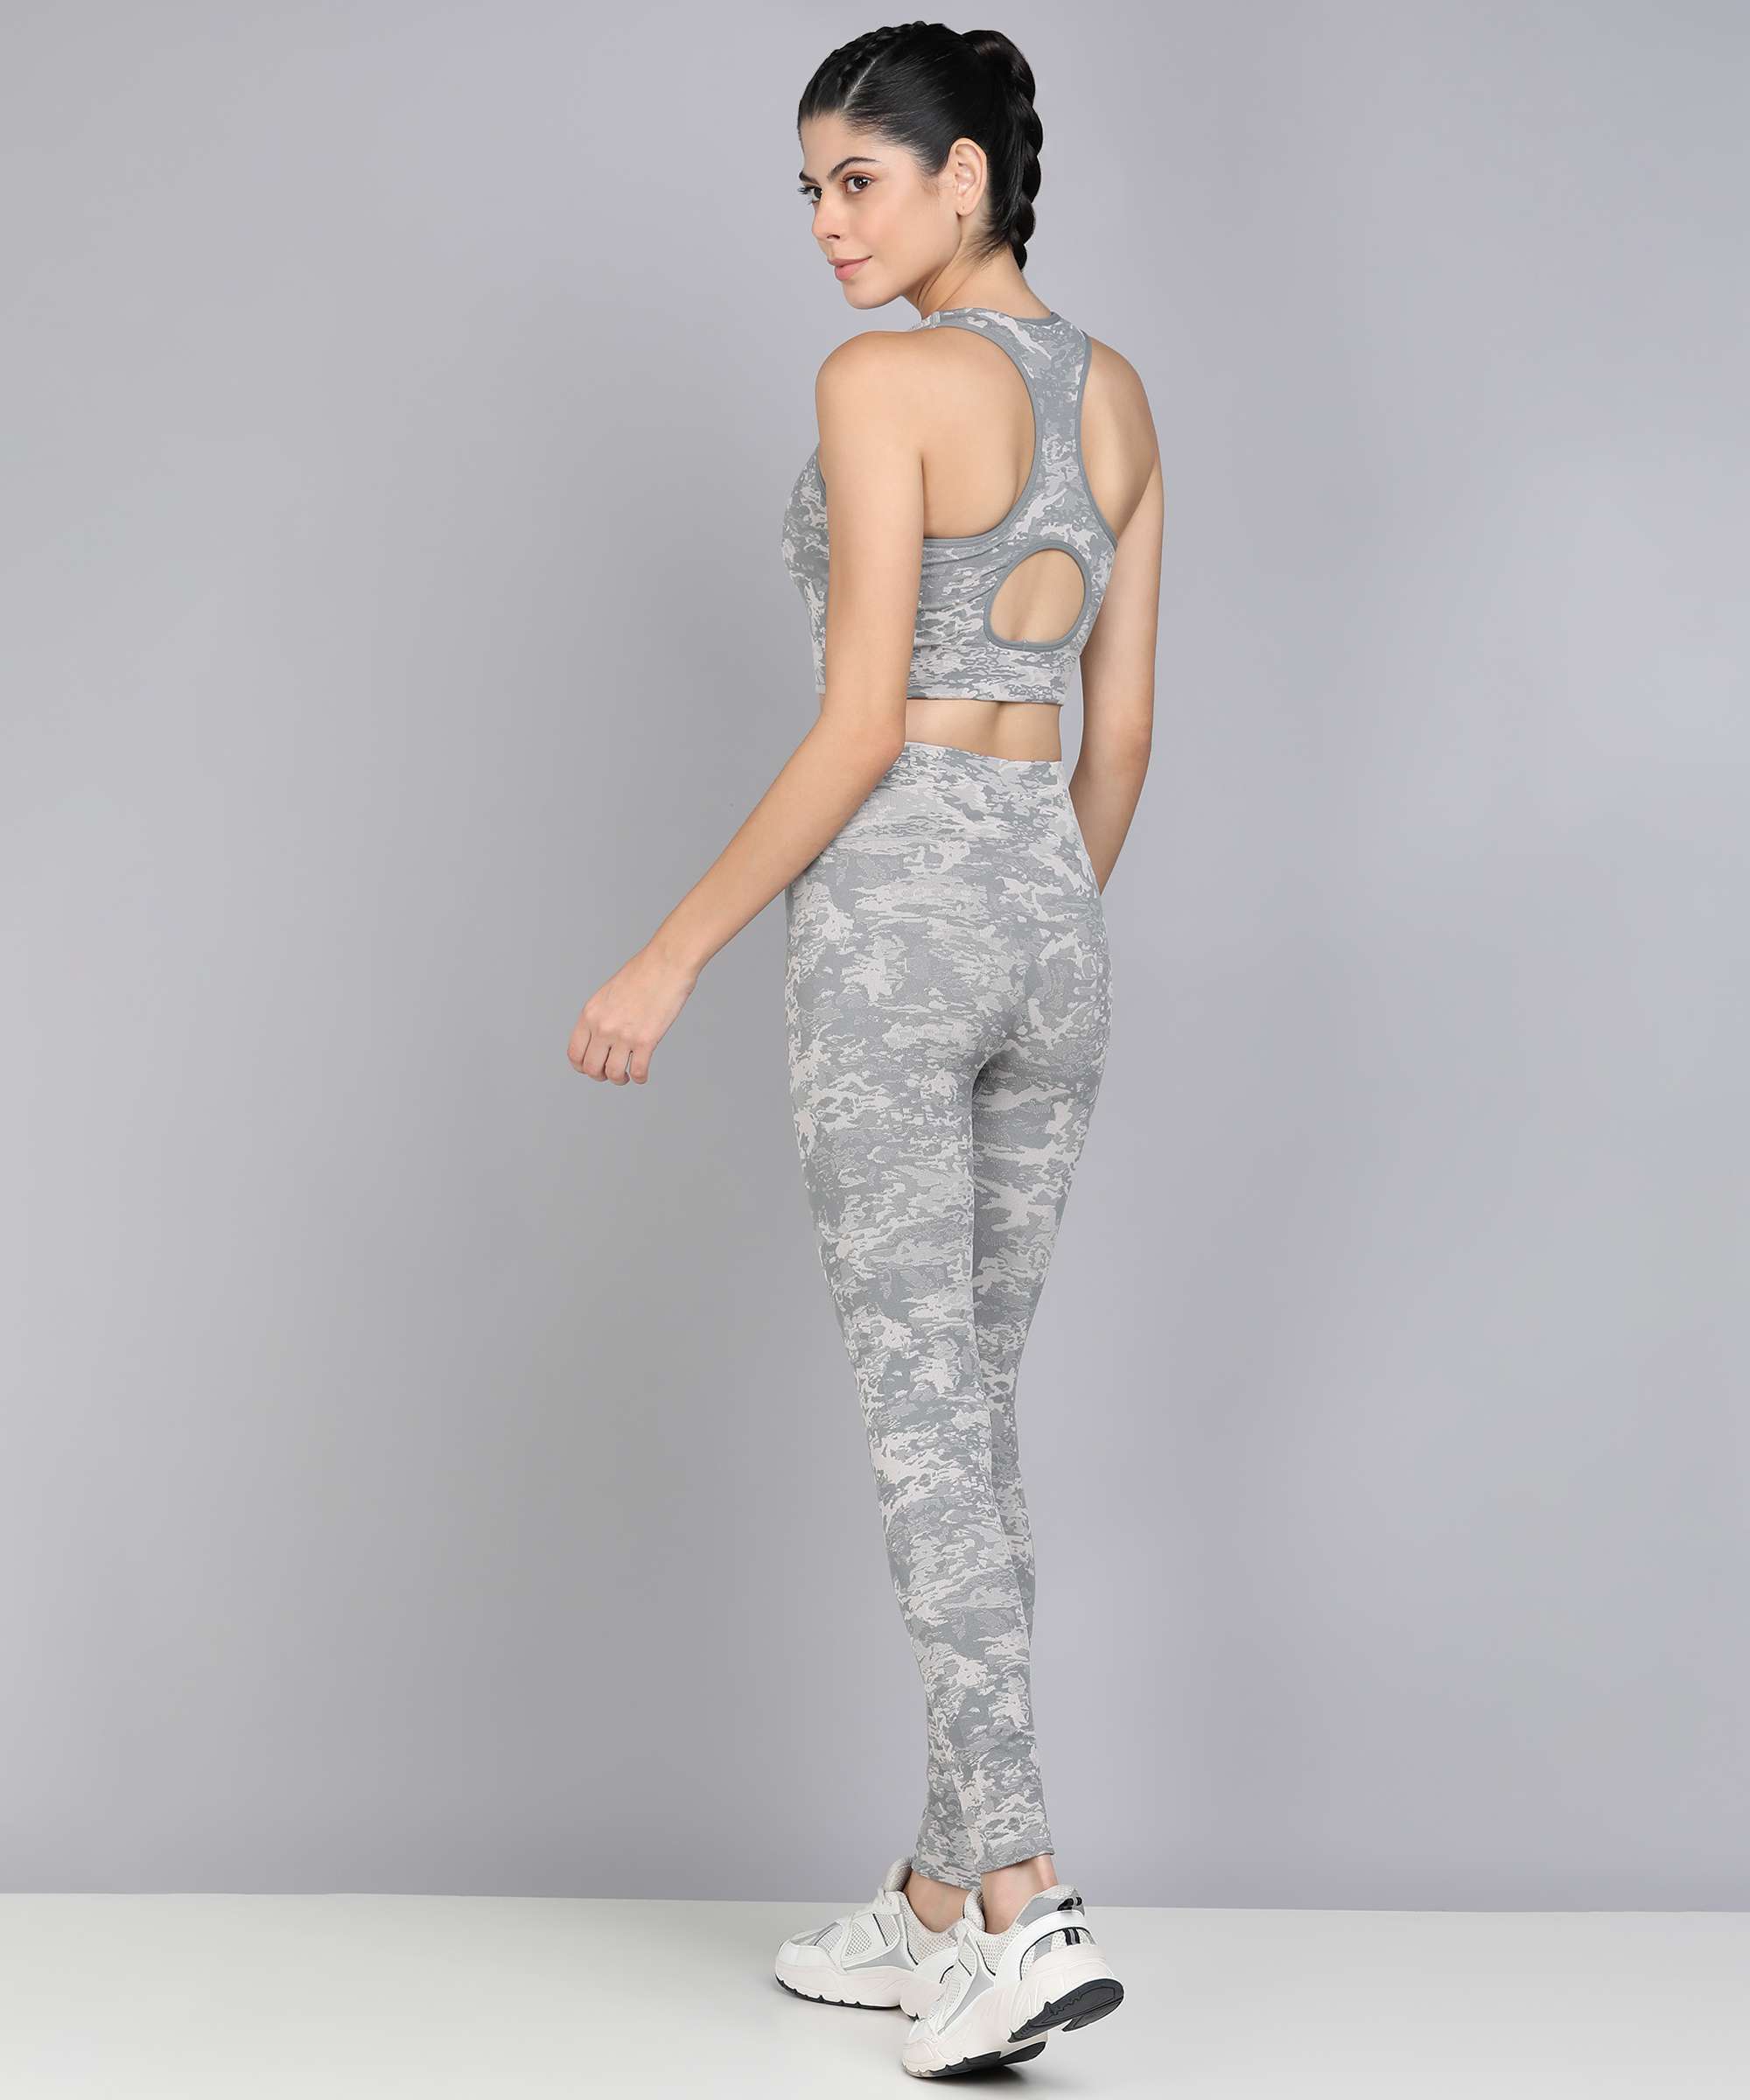 Seamless Camo Leggings - KOBO SPORTS - Exclusively Designed for